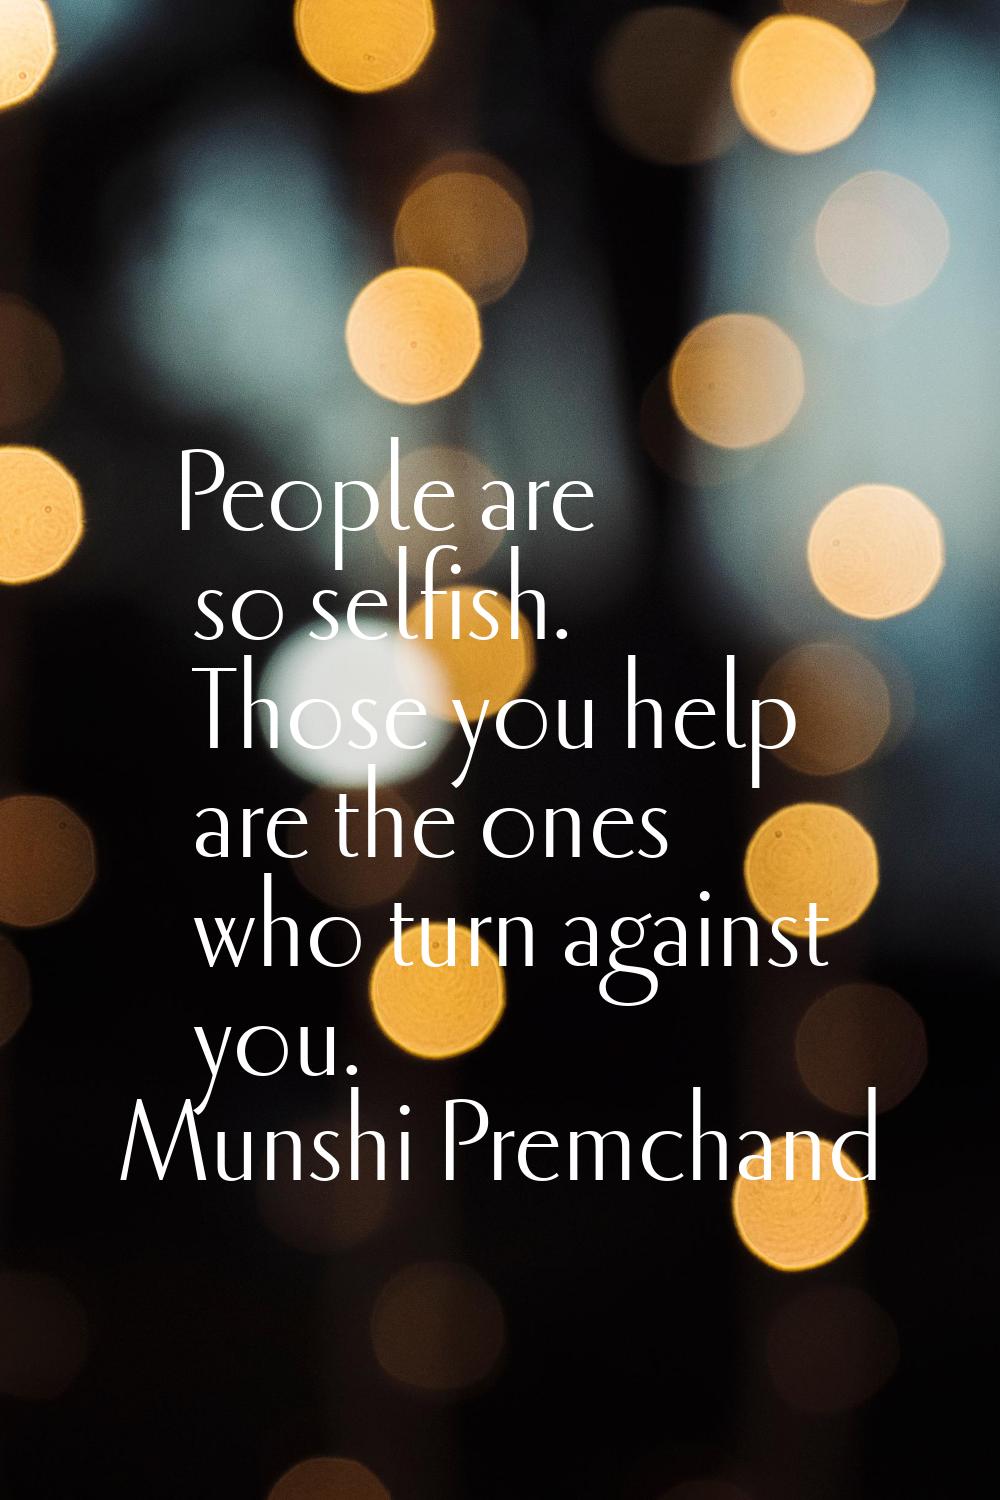 People are so selfish. Those you help are the ones who turn against you.